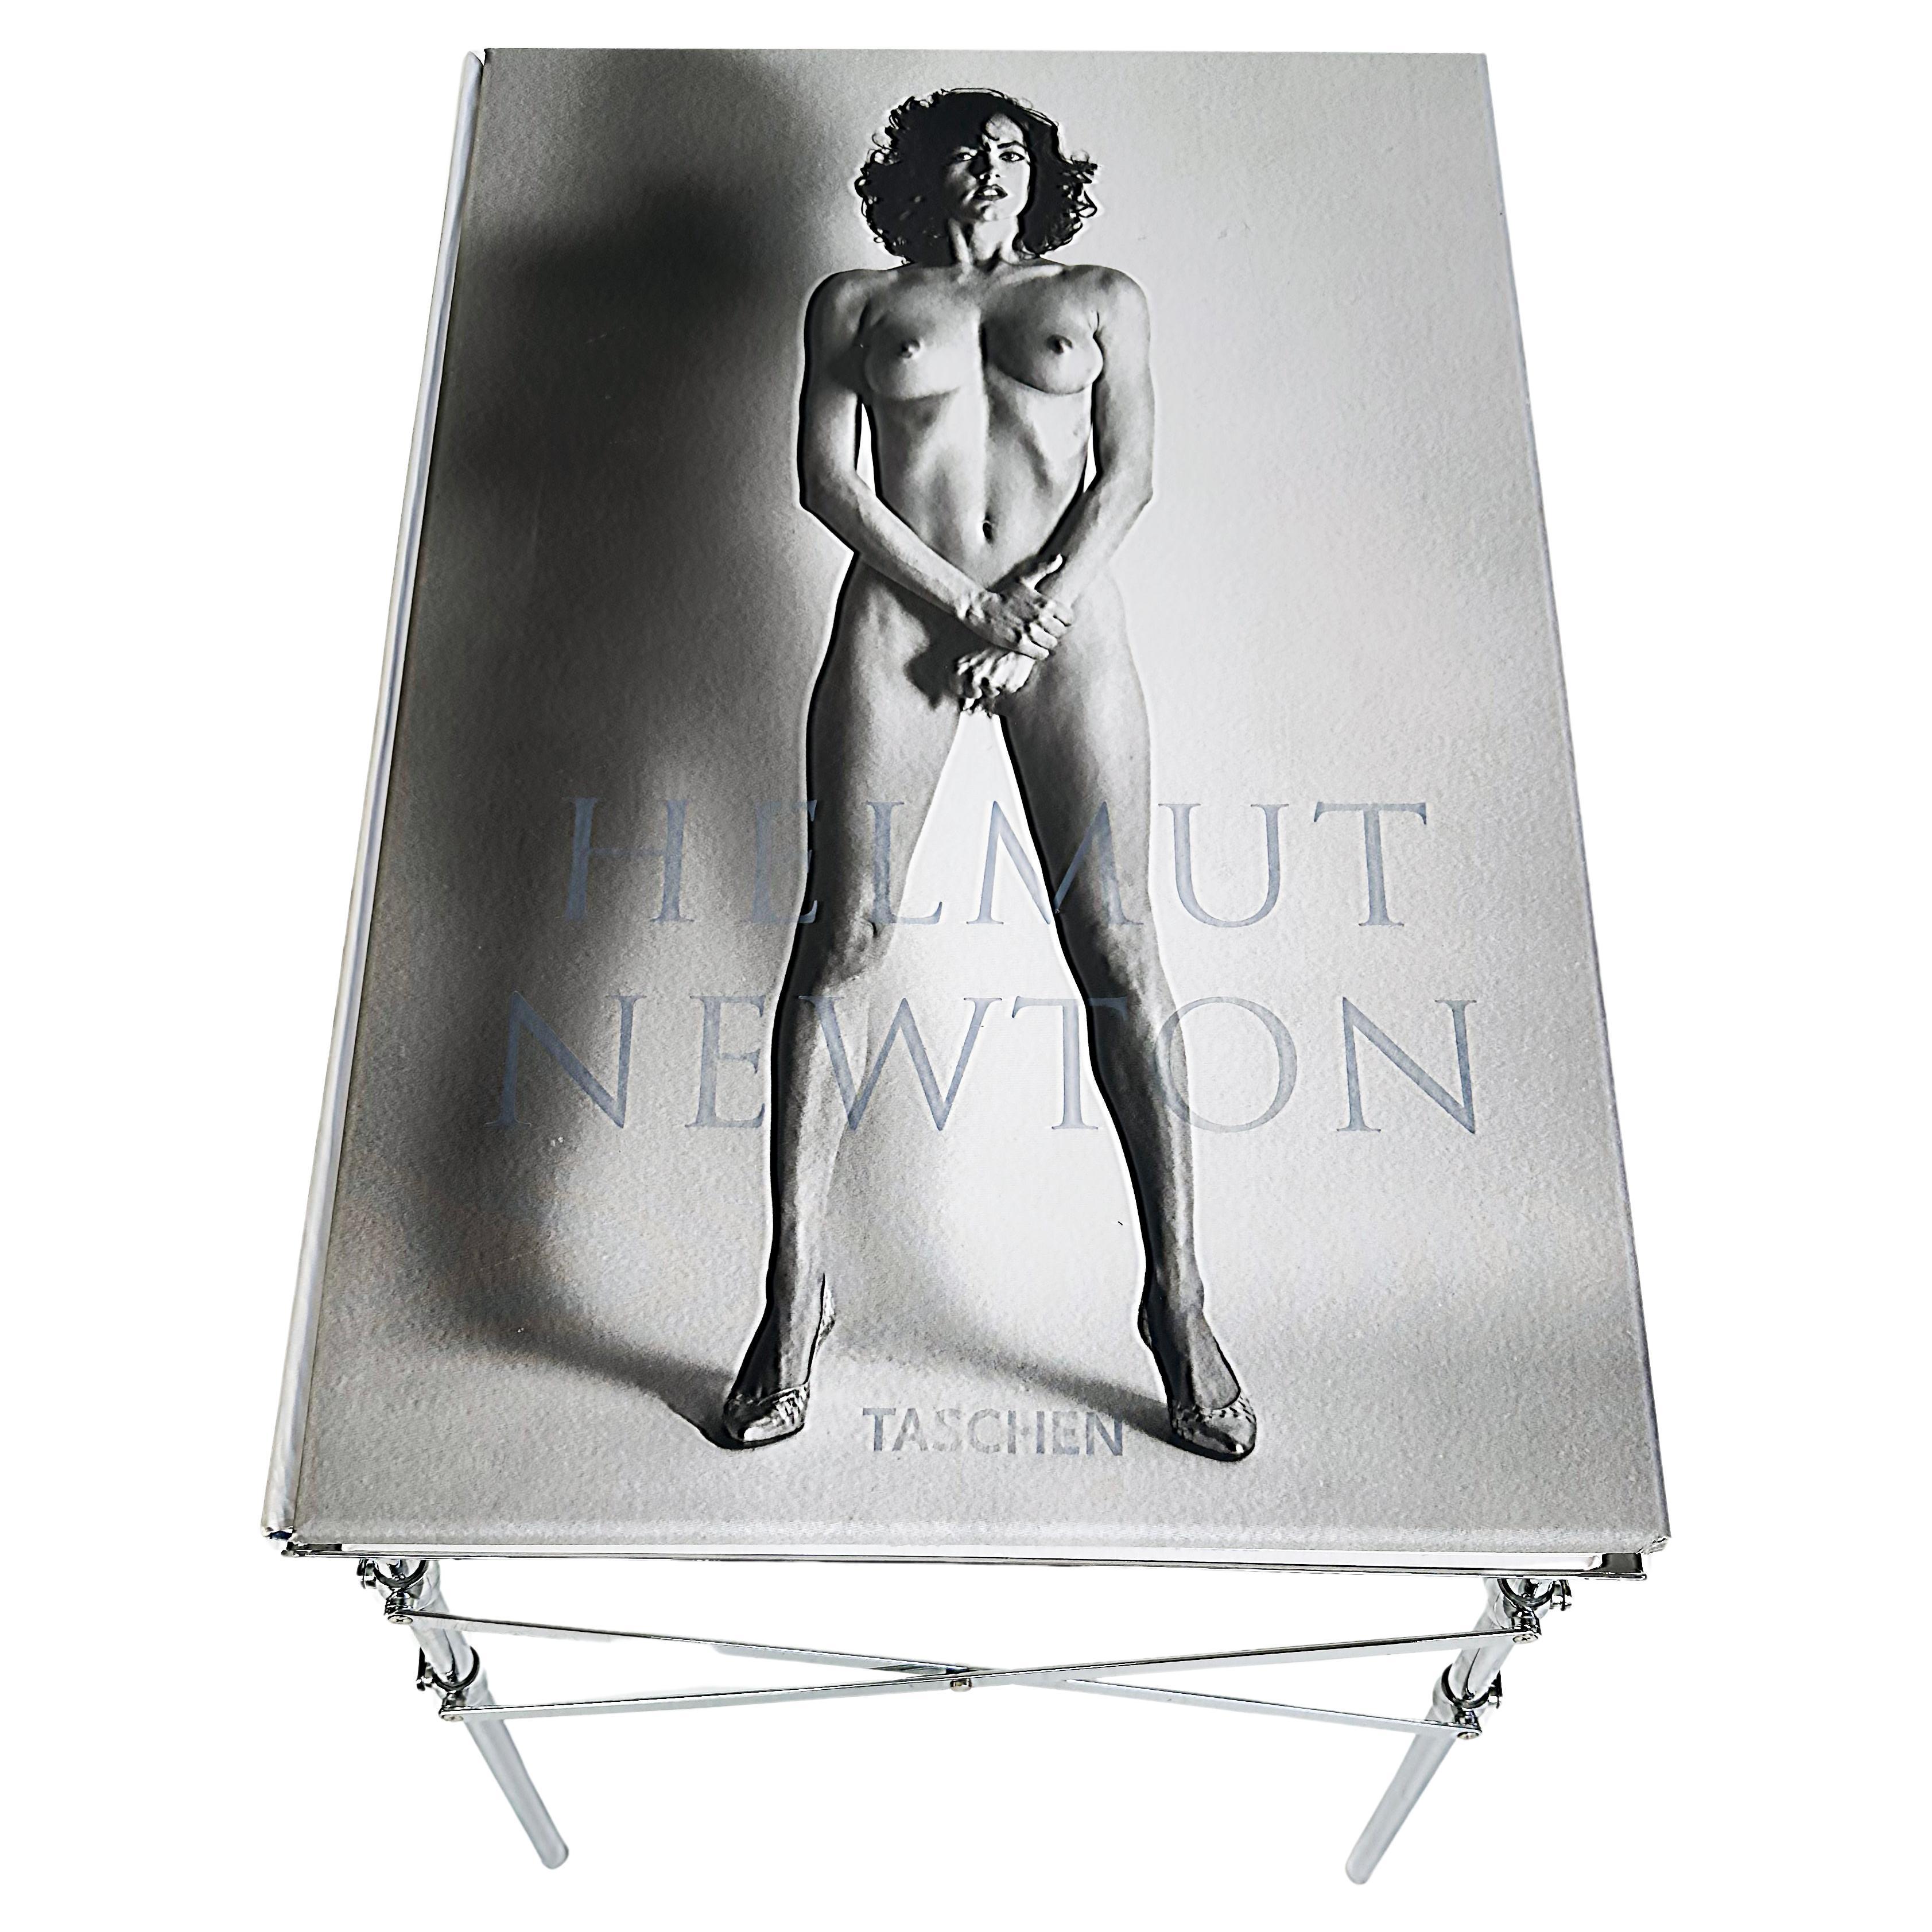 Helmut Newton Sumo Taschen Book, Philippe Starck Stand, Signed Limited Edition For Sale